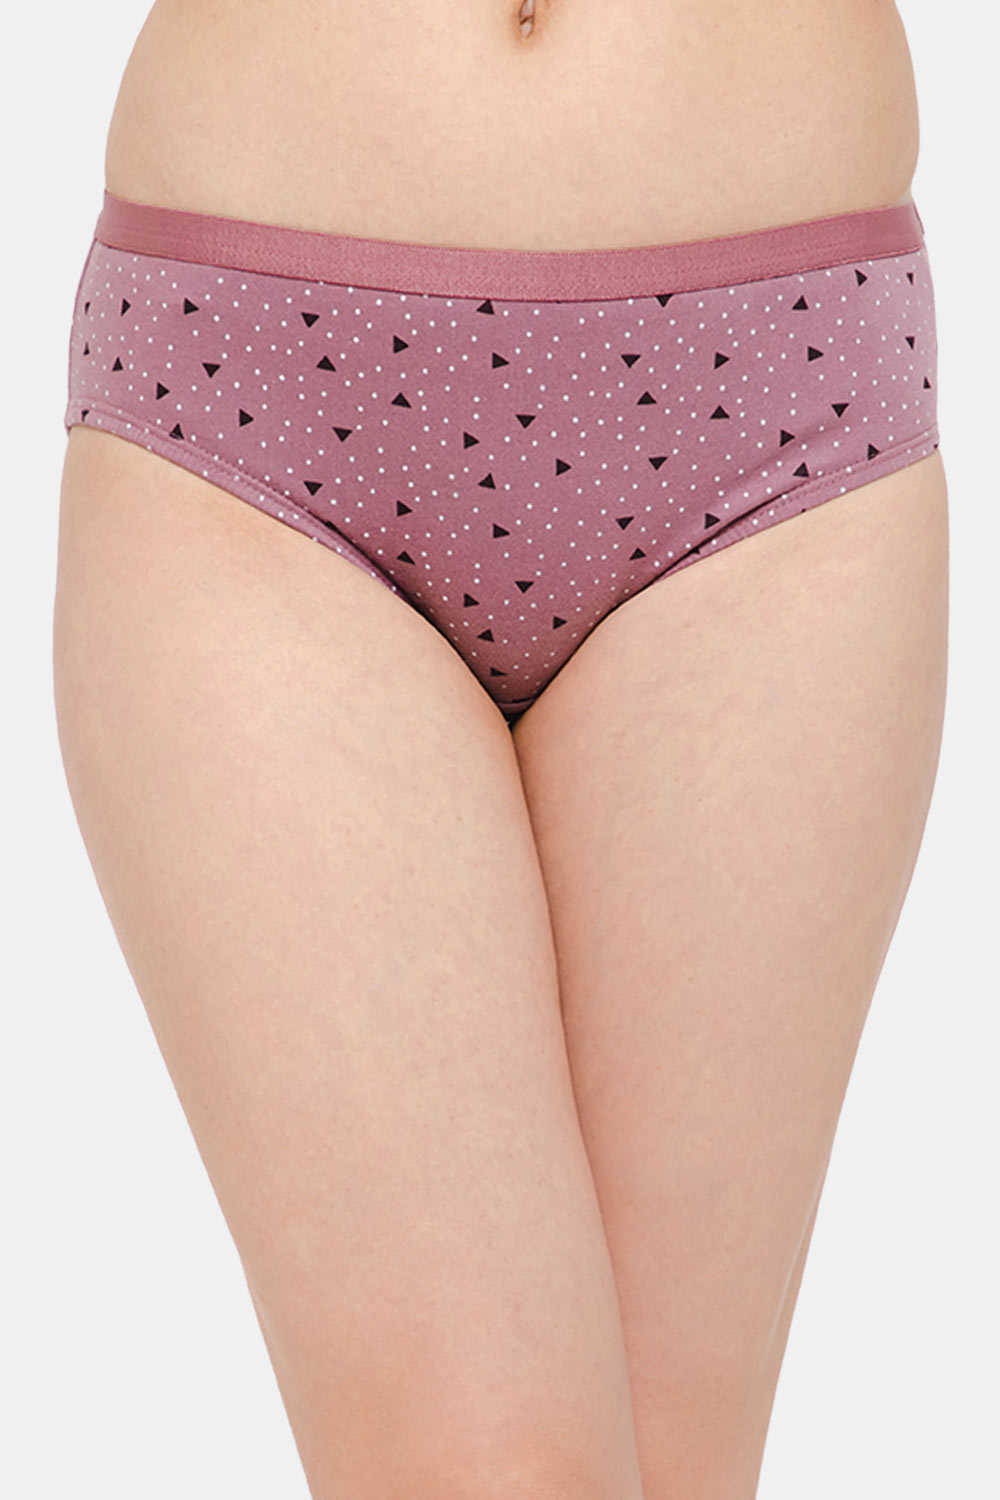 Searching For the Perfect Panties? Embrace Comfort and Confidence